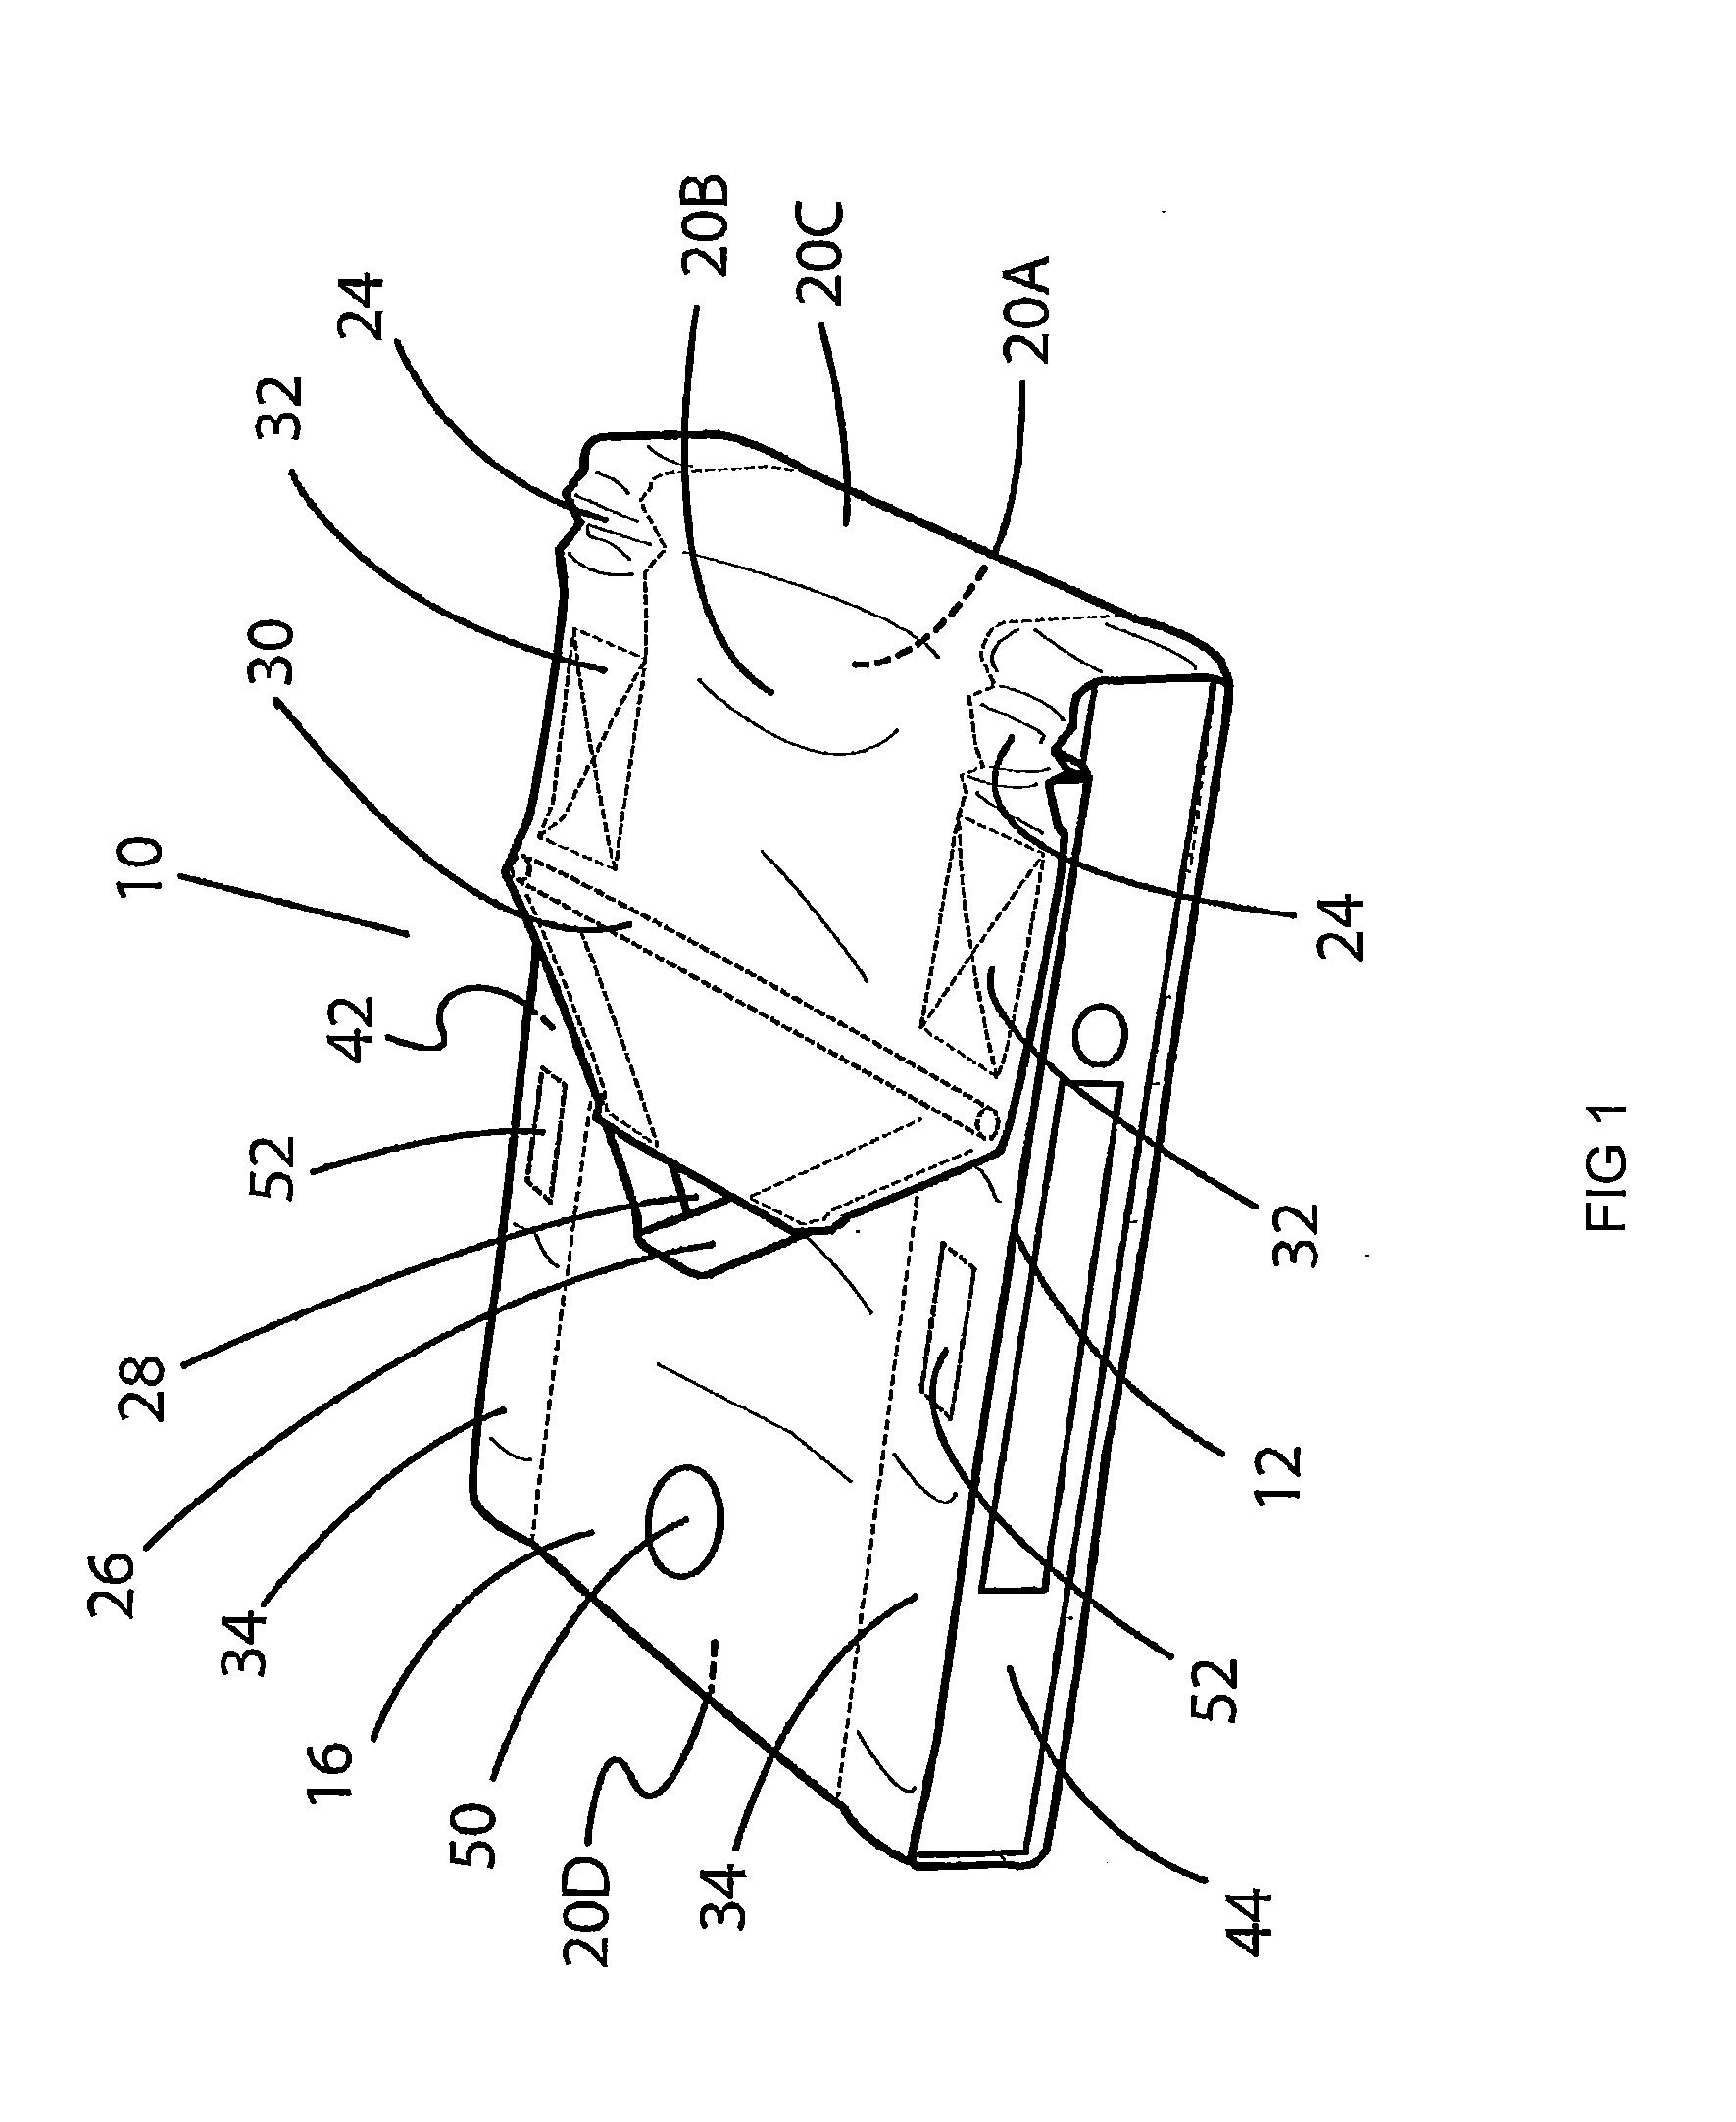 Apparatus and method for testing electronic equipment